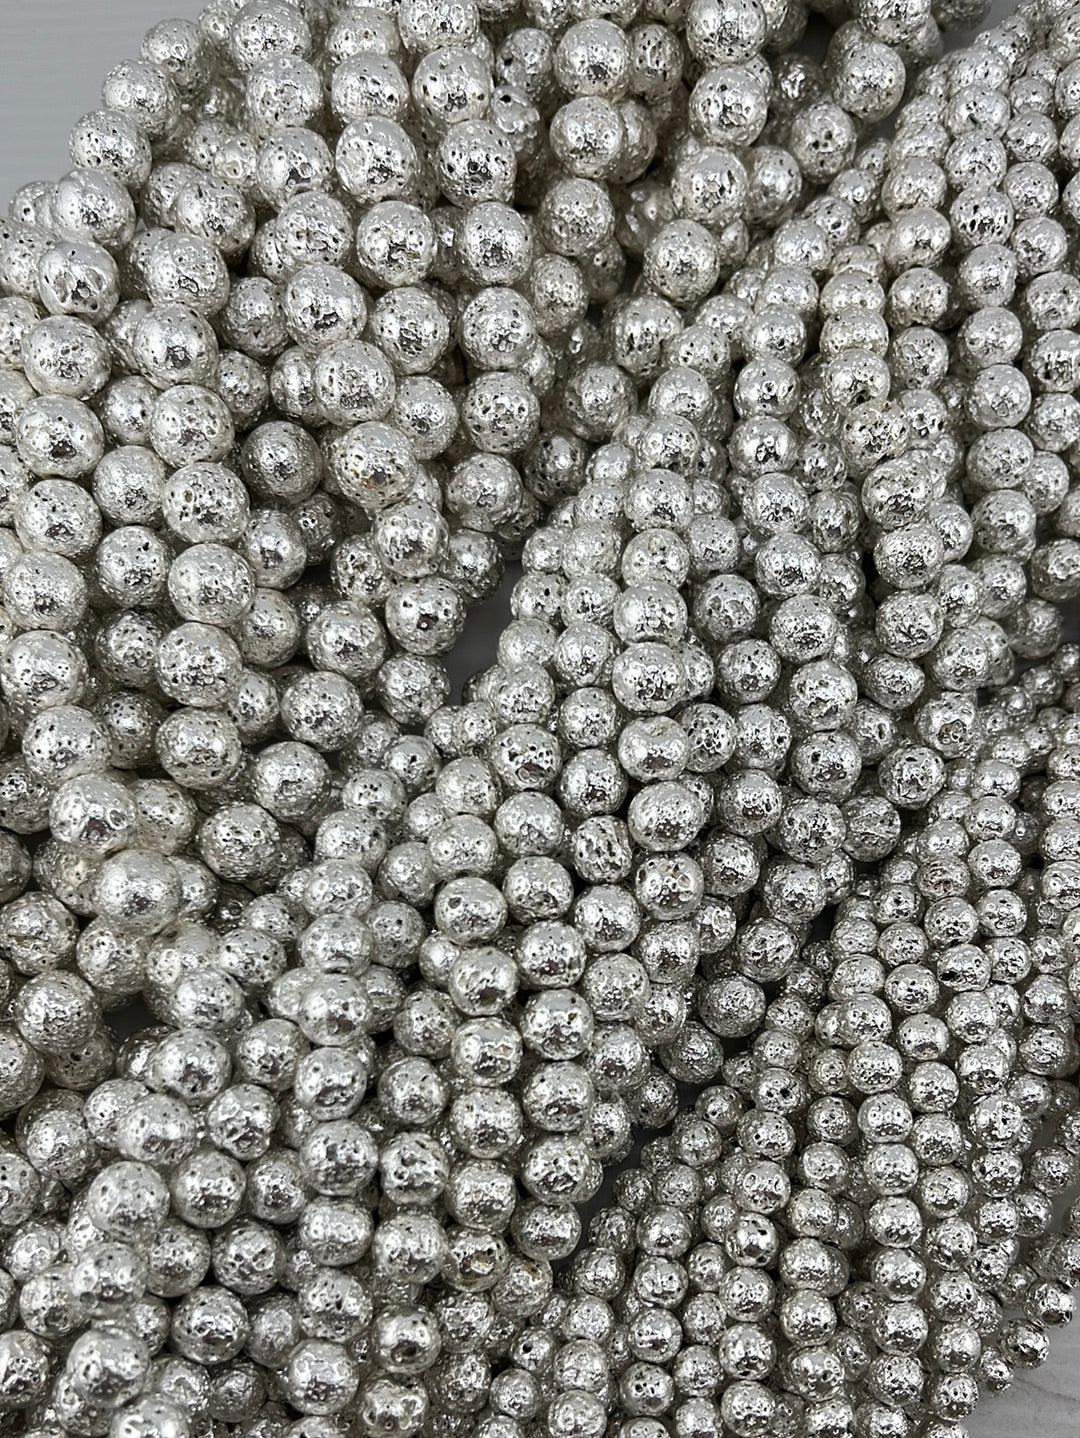 Crafting supplies such as silver lava beads available at wholesale and retail prices, only at our crystal shop in San Diego!